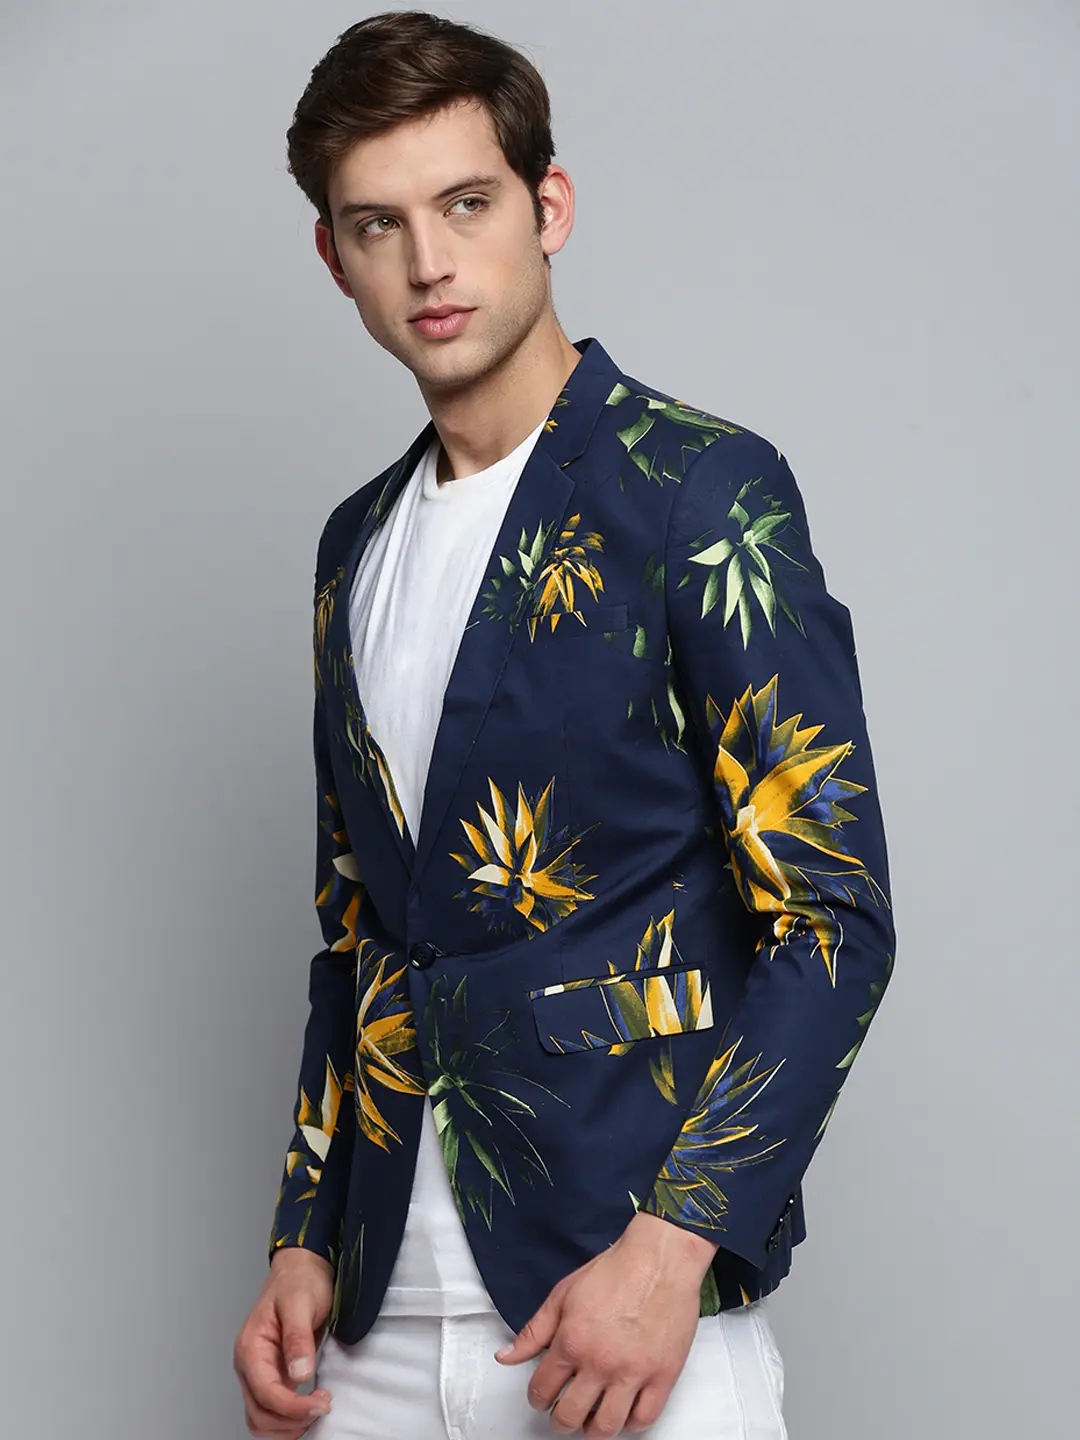 SHOWOFF Men's Printed Notched Lapel Navy Blue Single-Breasted Blazer